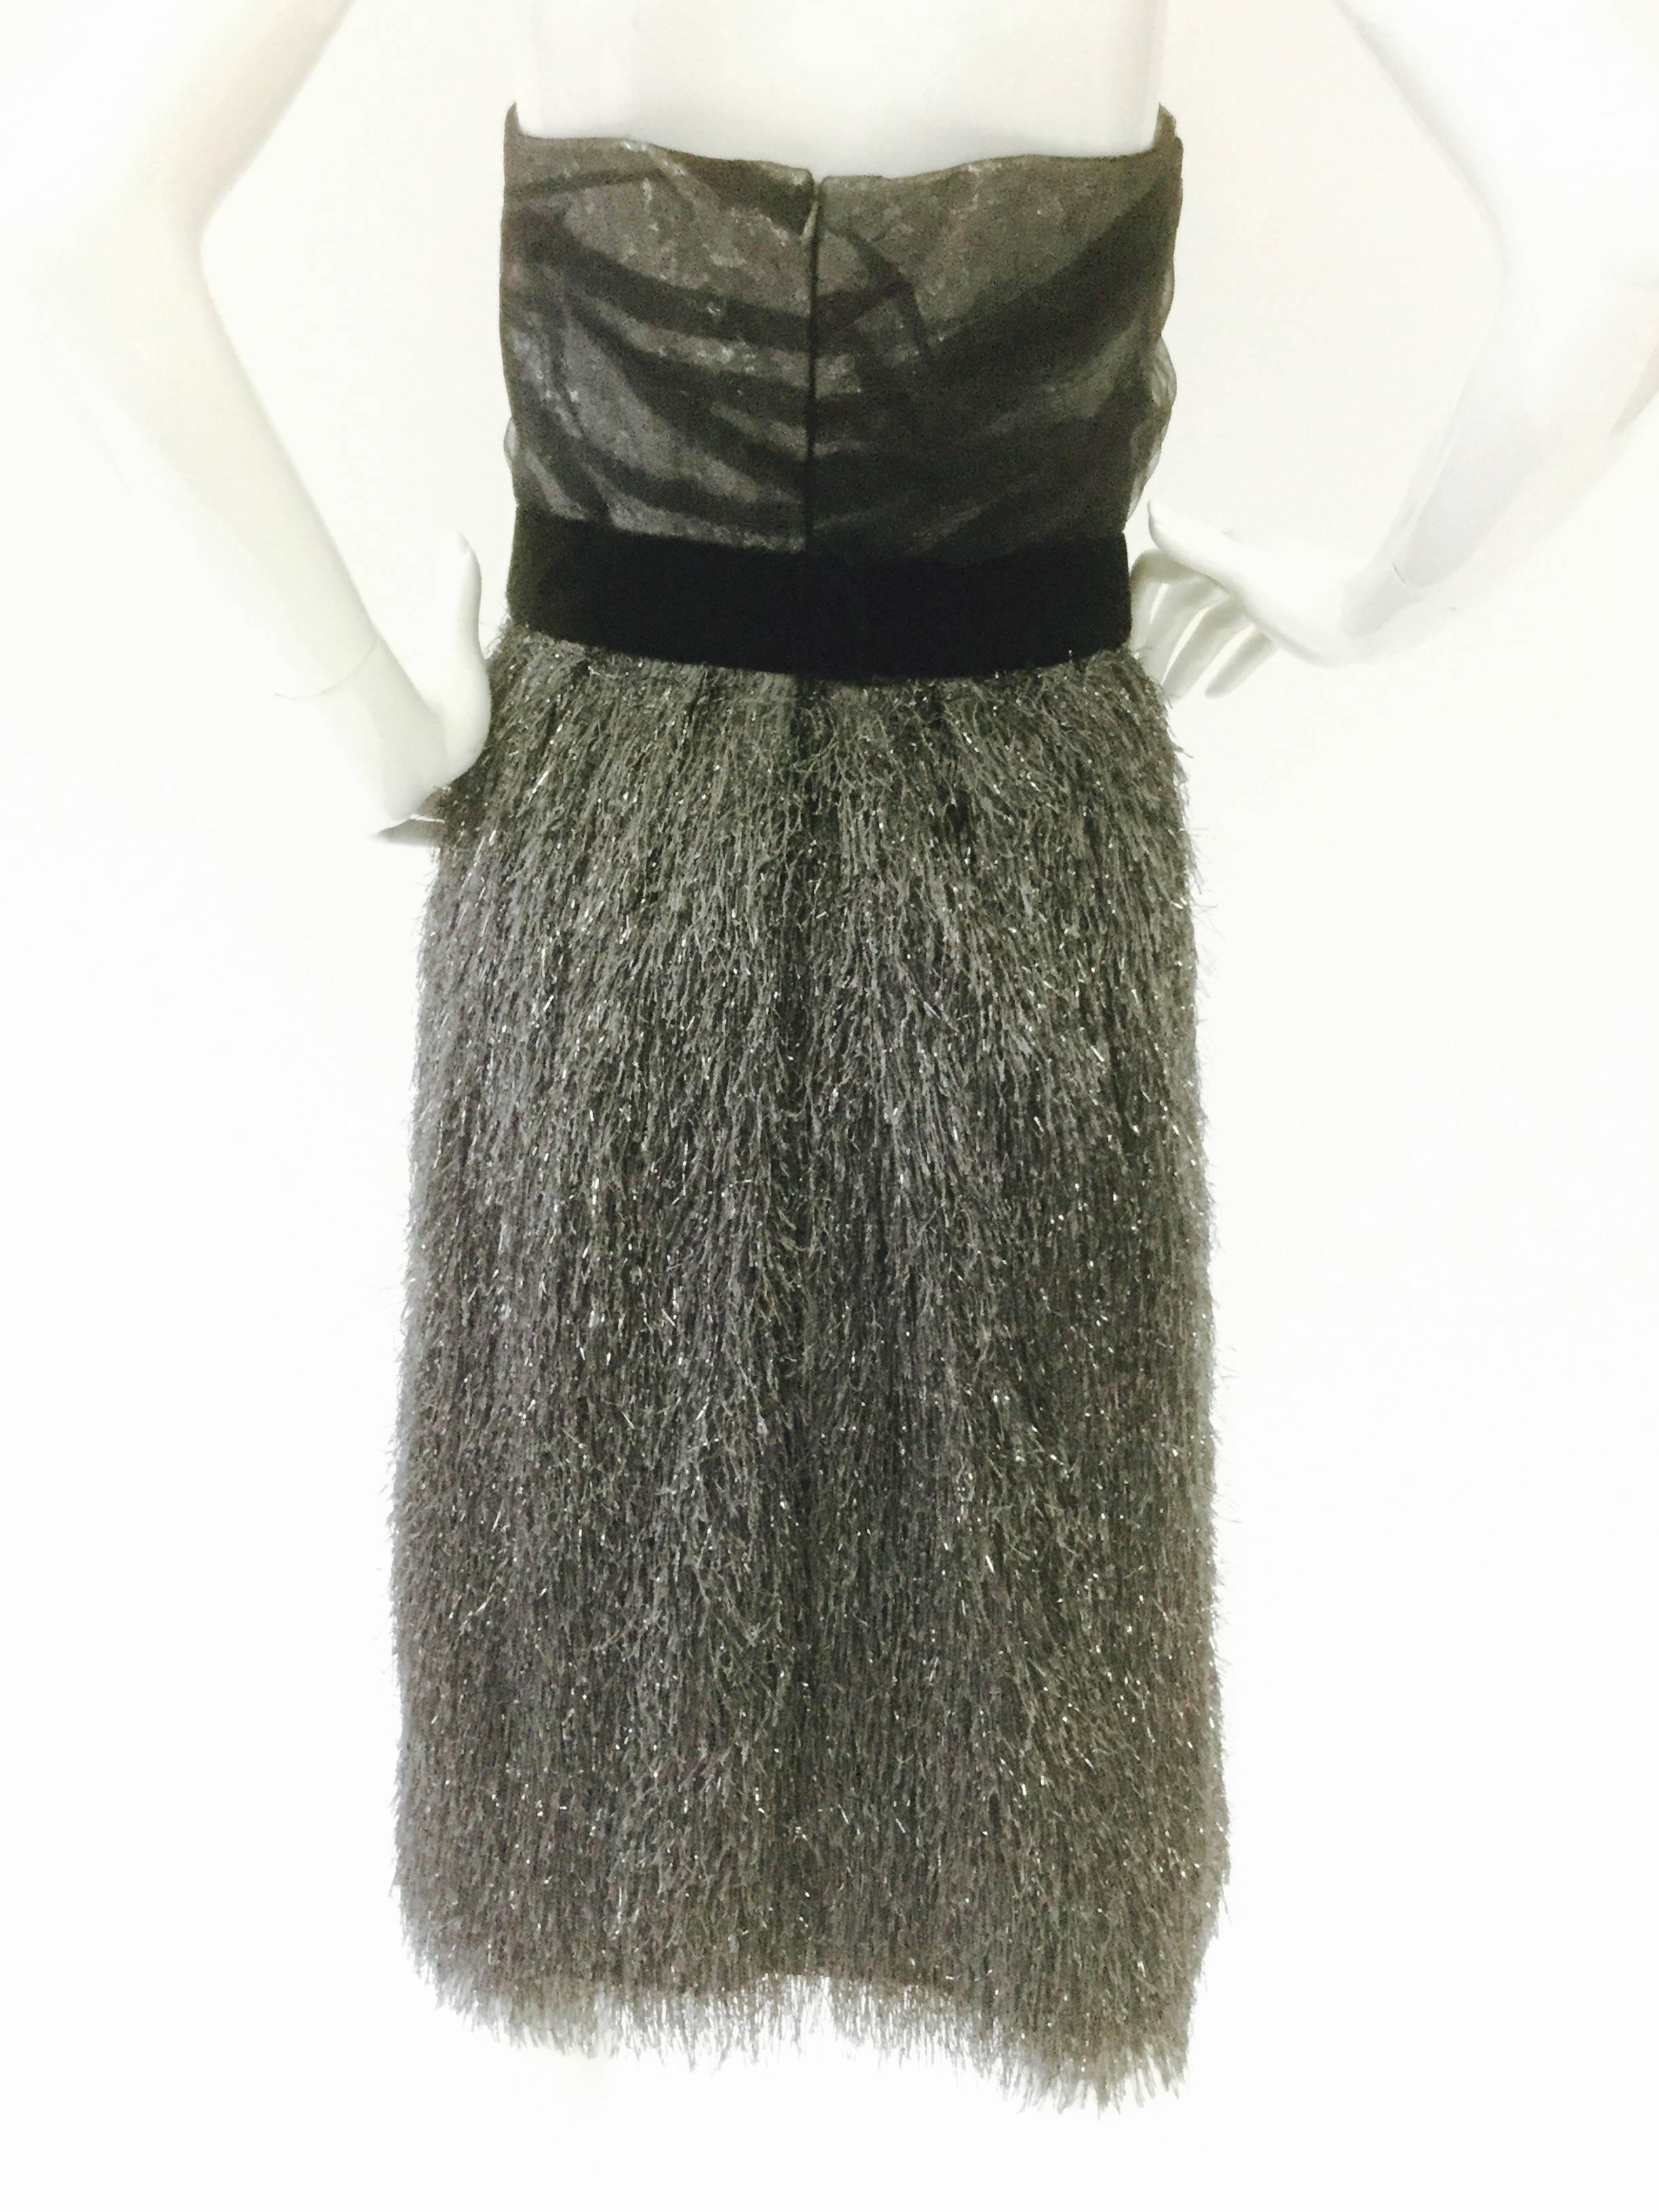 1970s Bill Blass Sequin Tassel Cocktail Dress In Good Condition For Sale In Houston, TX